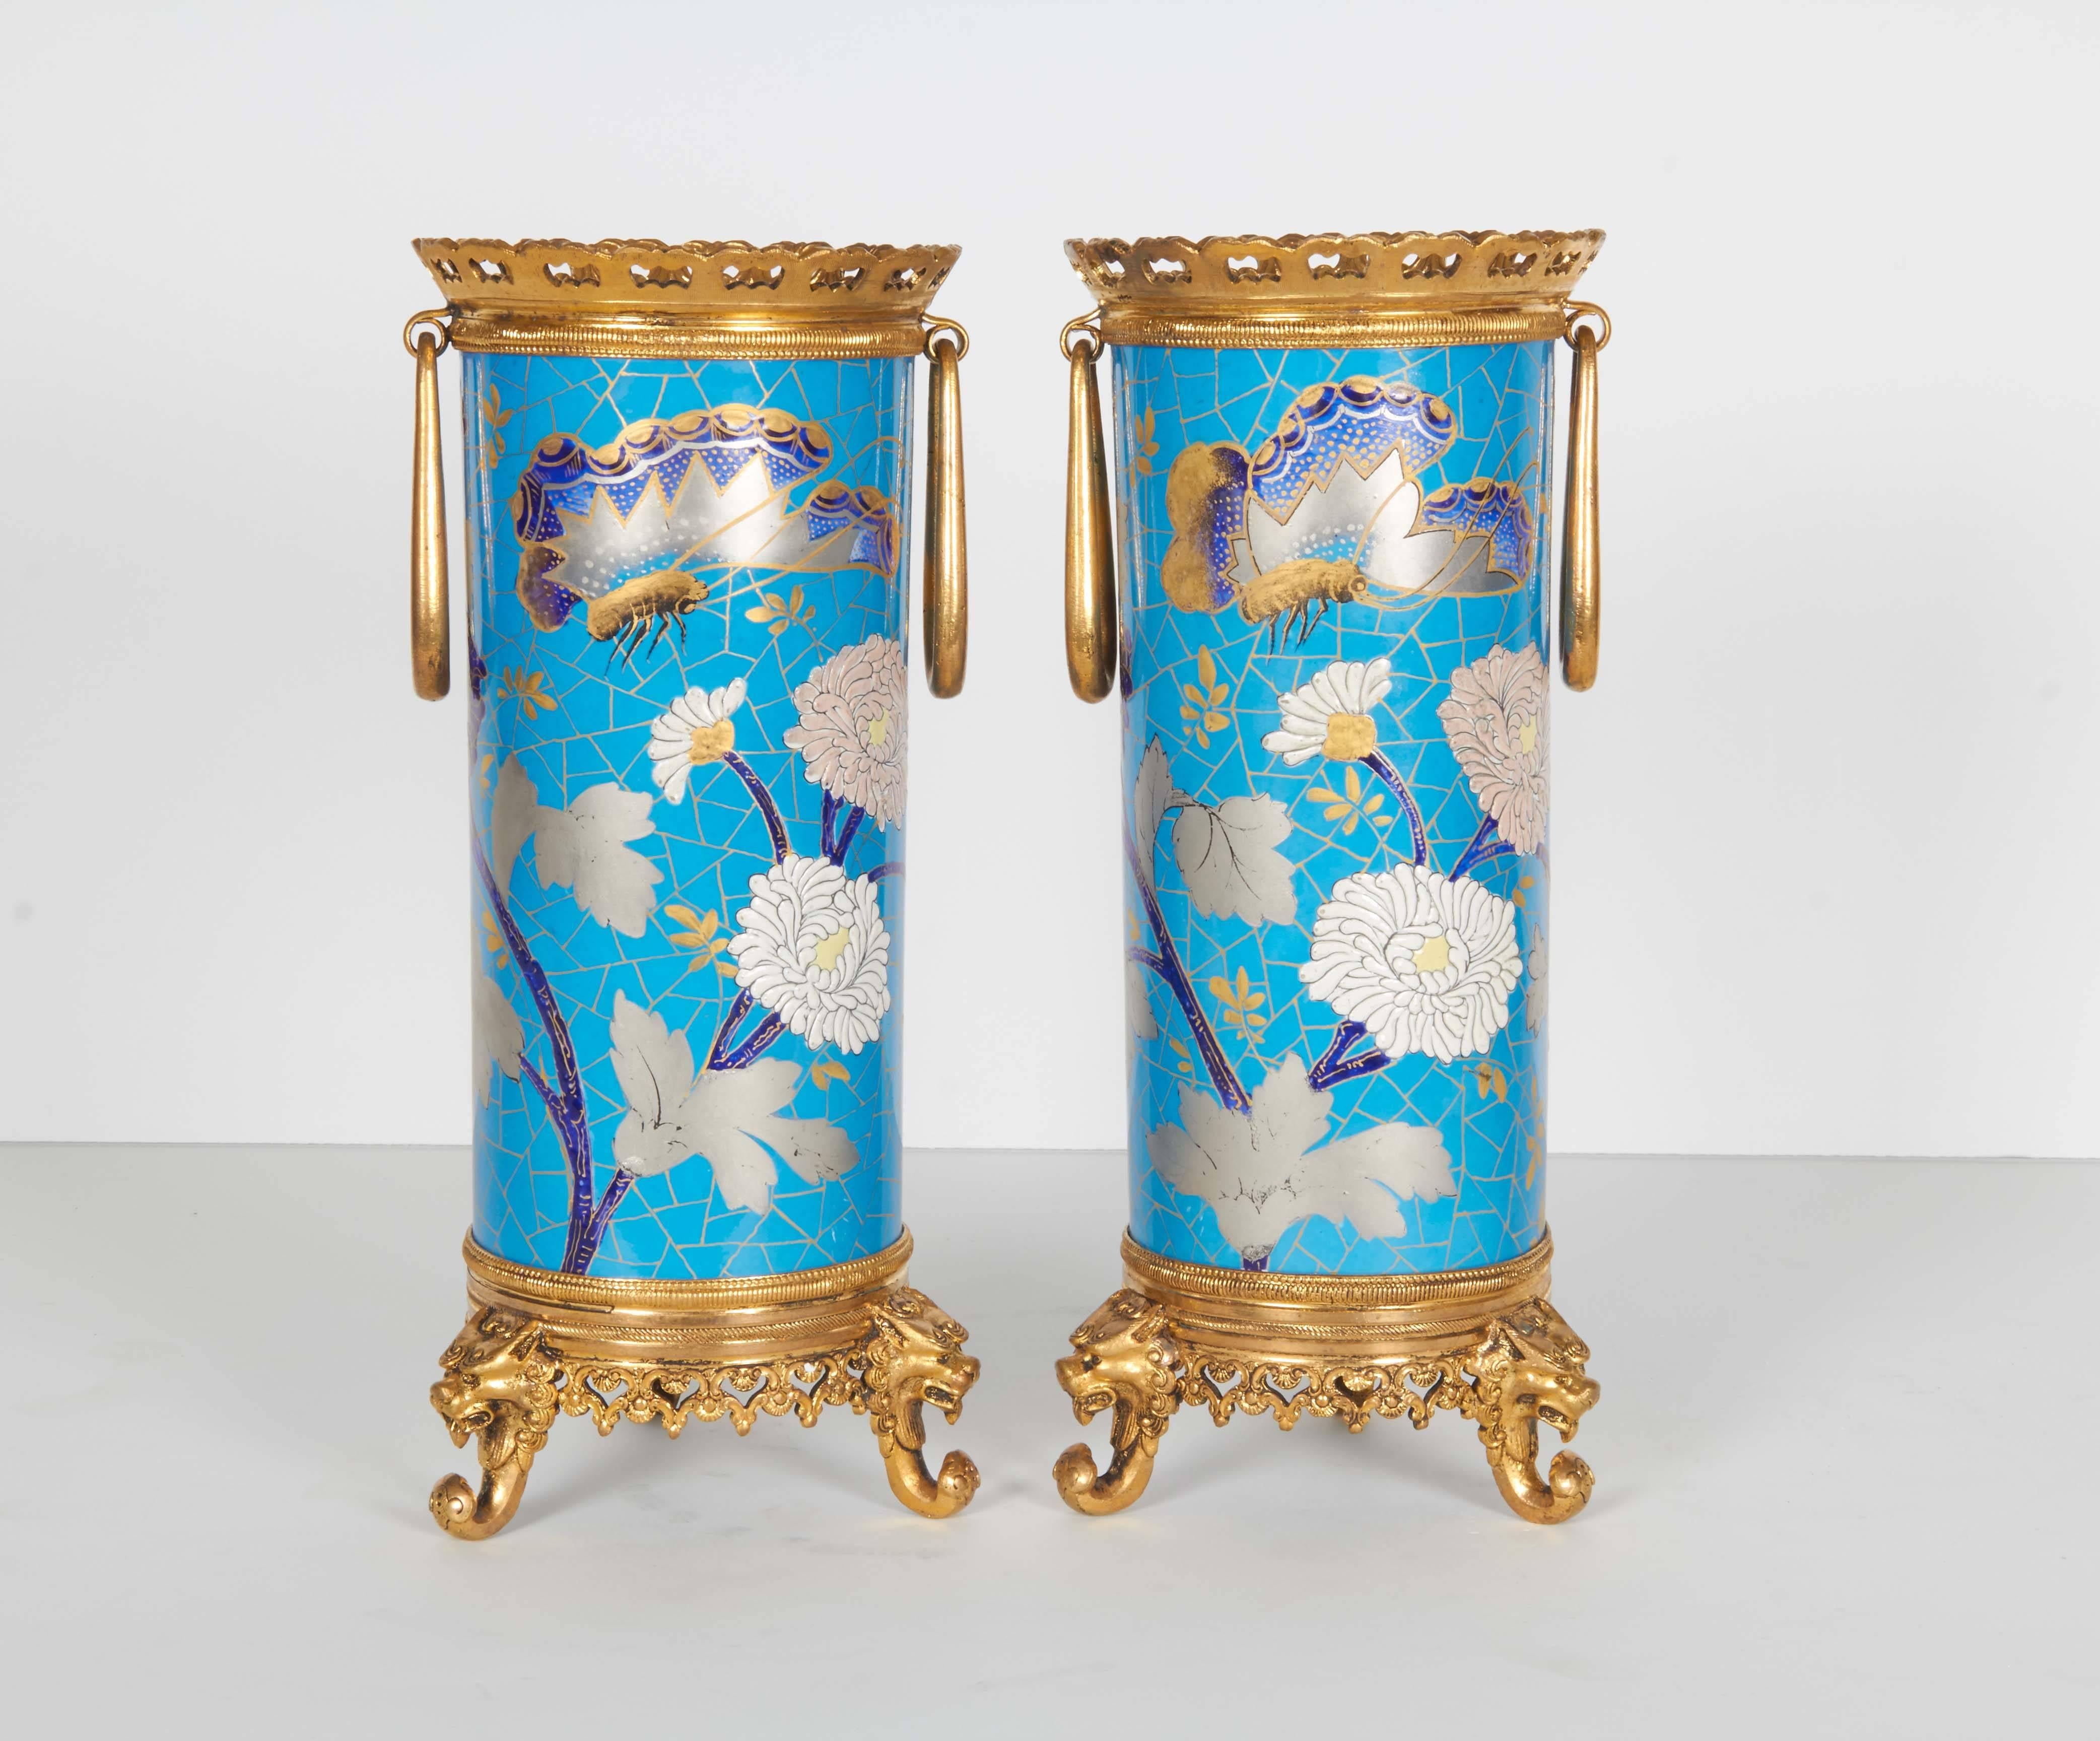 Pair of French Japonisme ormolu-mounted blue porcelain vases signed Creil et Montereau.

Very finely painted with flowers and insects. Mounted in French bronze. Signed on the bottom.